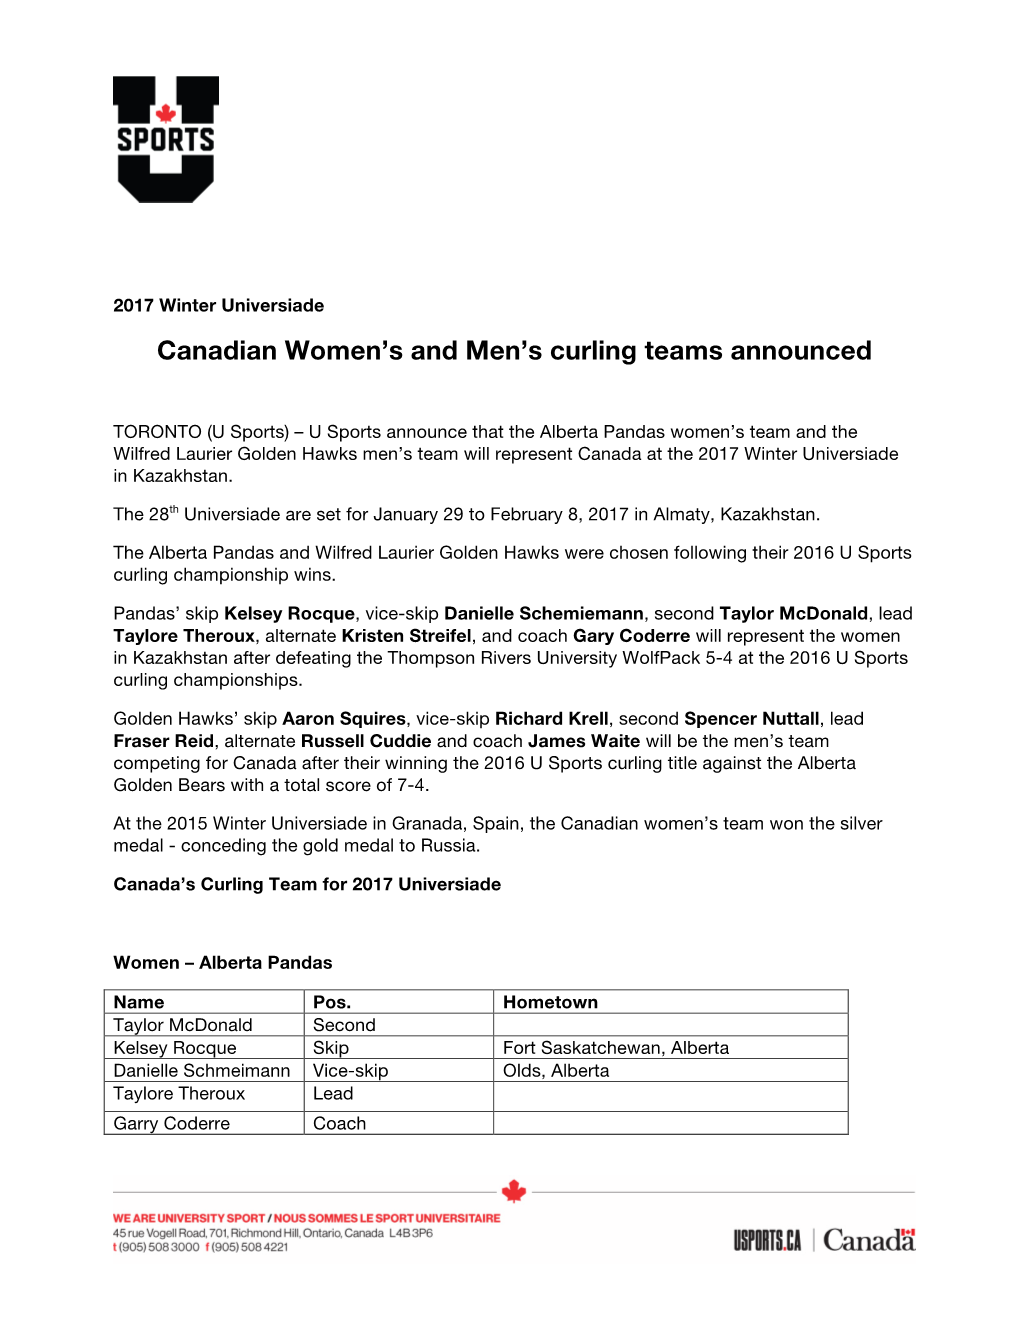 Canadian Women's and Men's Curling Teams Announced